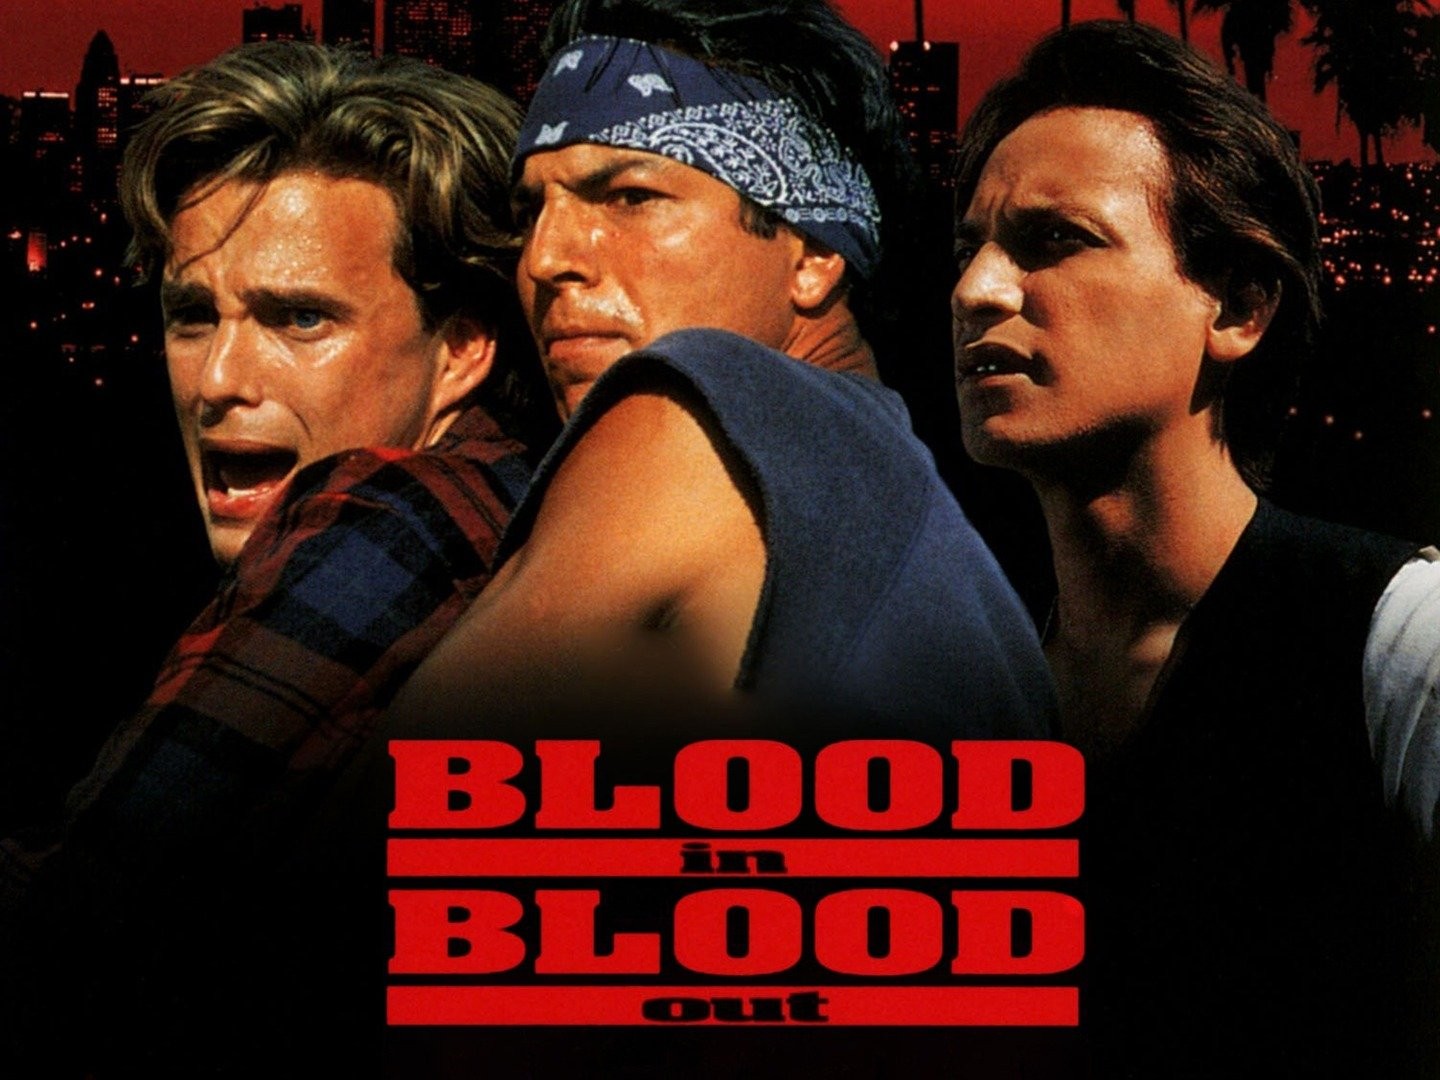 clare louise saunders recommends Full Movie Blood In Blood Out